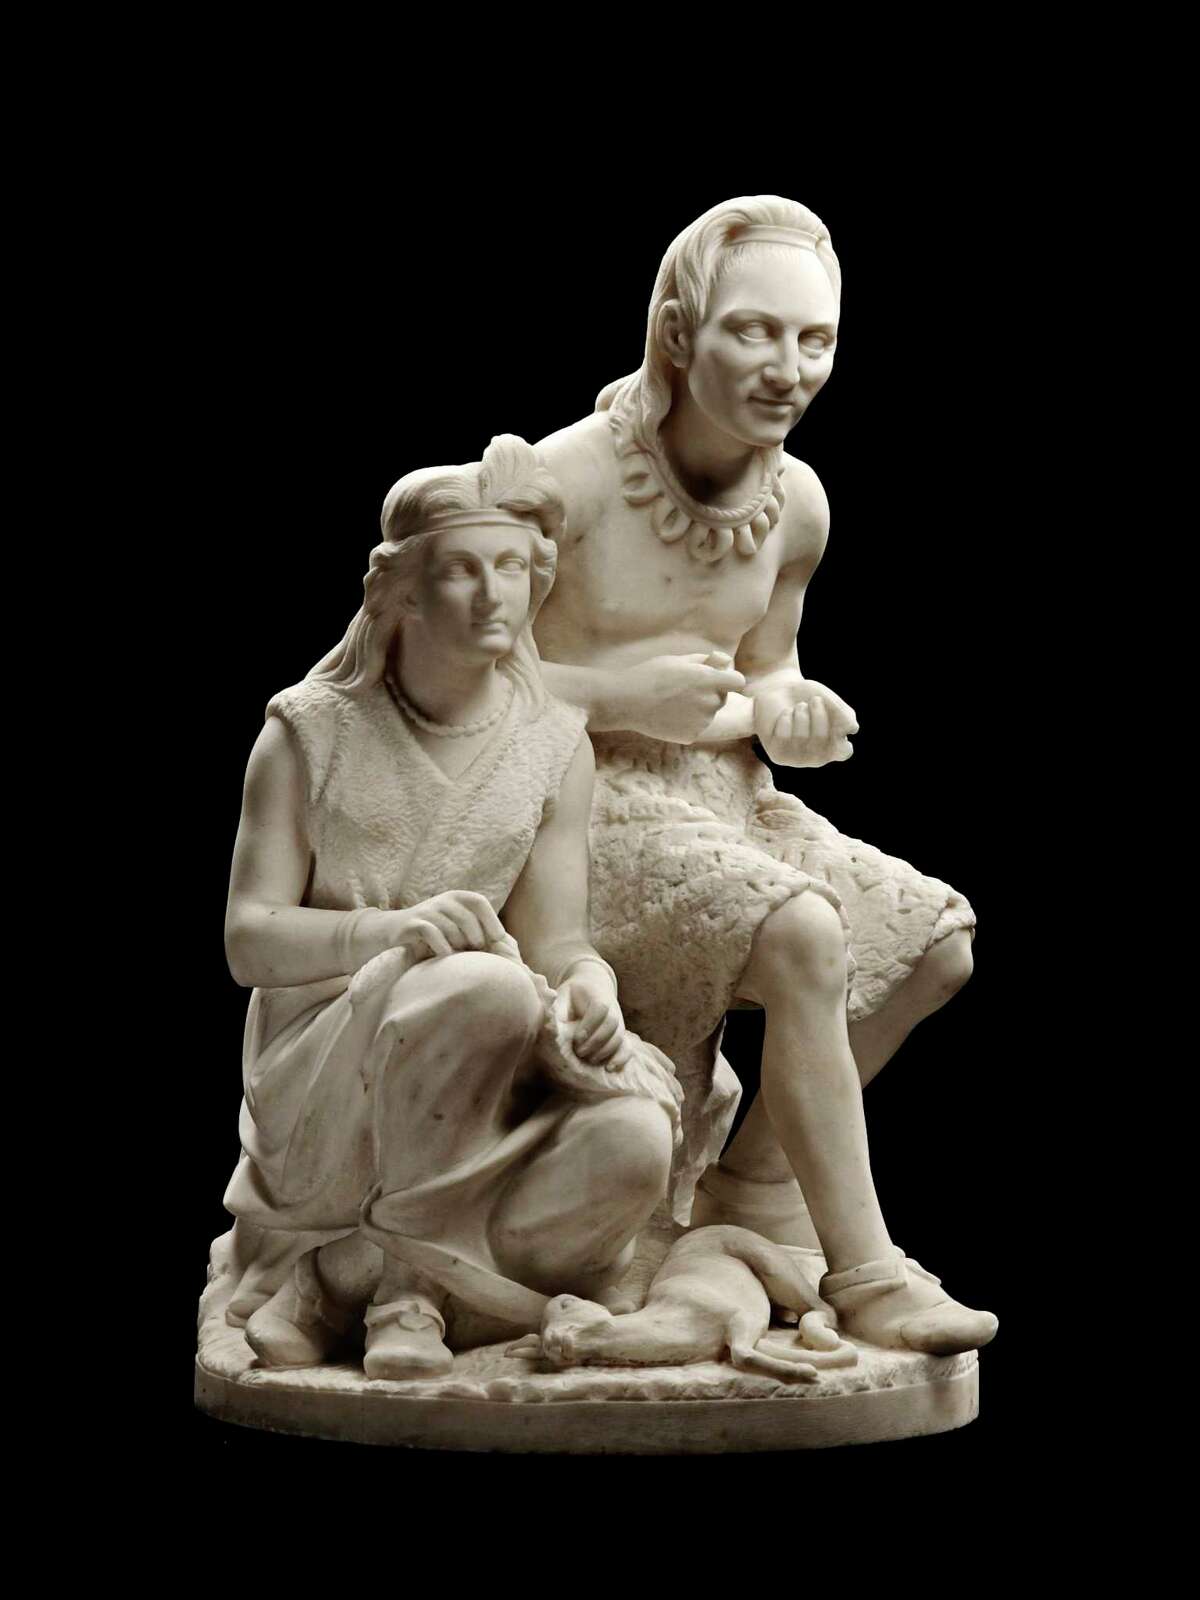 Edmonia Lewis' "Former arrows maker" is part of the collection of the Smithsonian American Art Museum and depicts a scene from the "Hiawatha song" by Henry Wadsworth Longfellow.